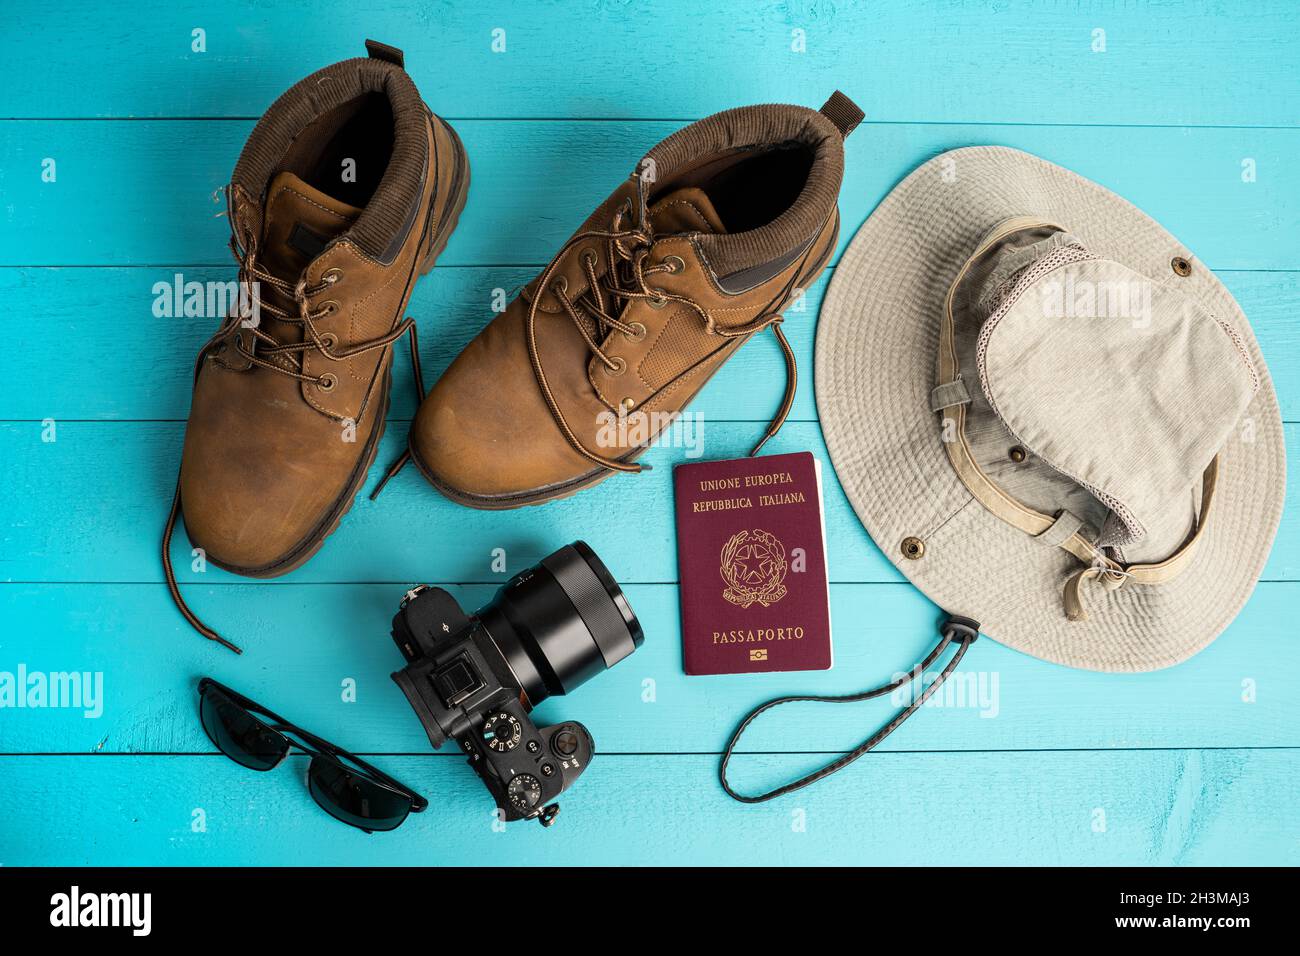 A camera, a hat and a pair of shoes on a colored surface Stock Photo